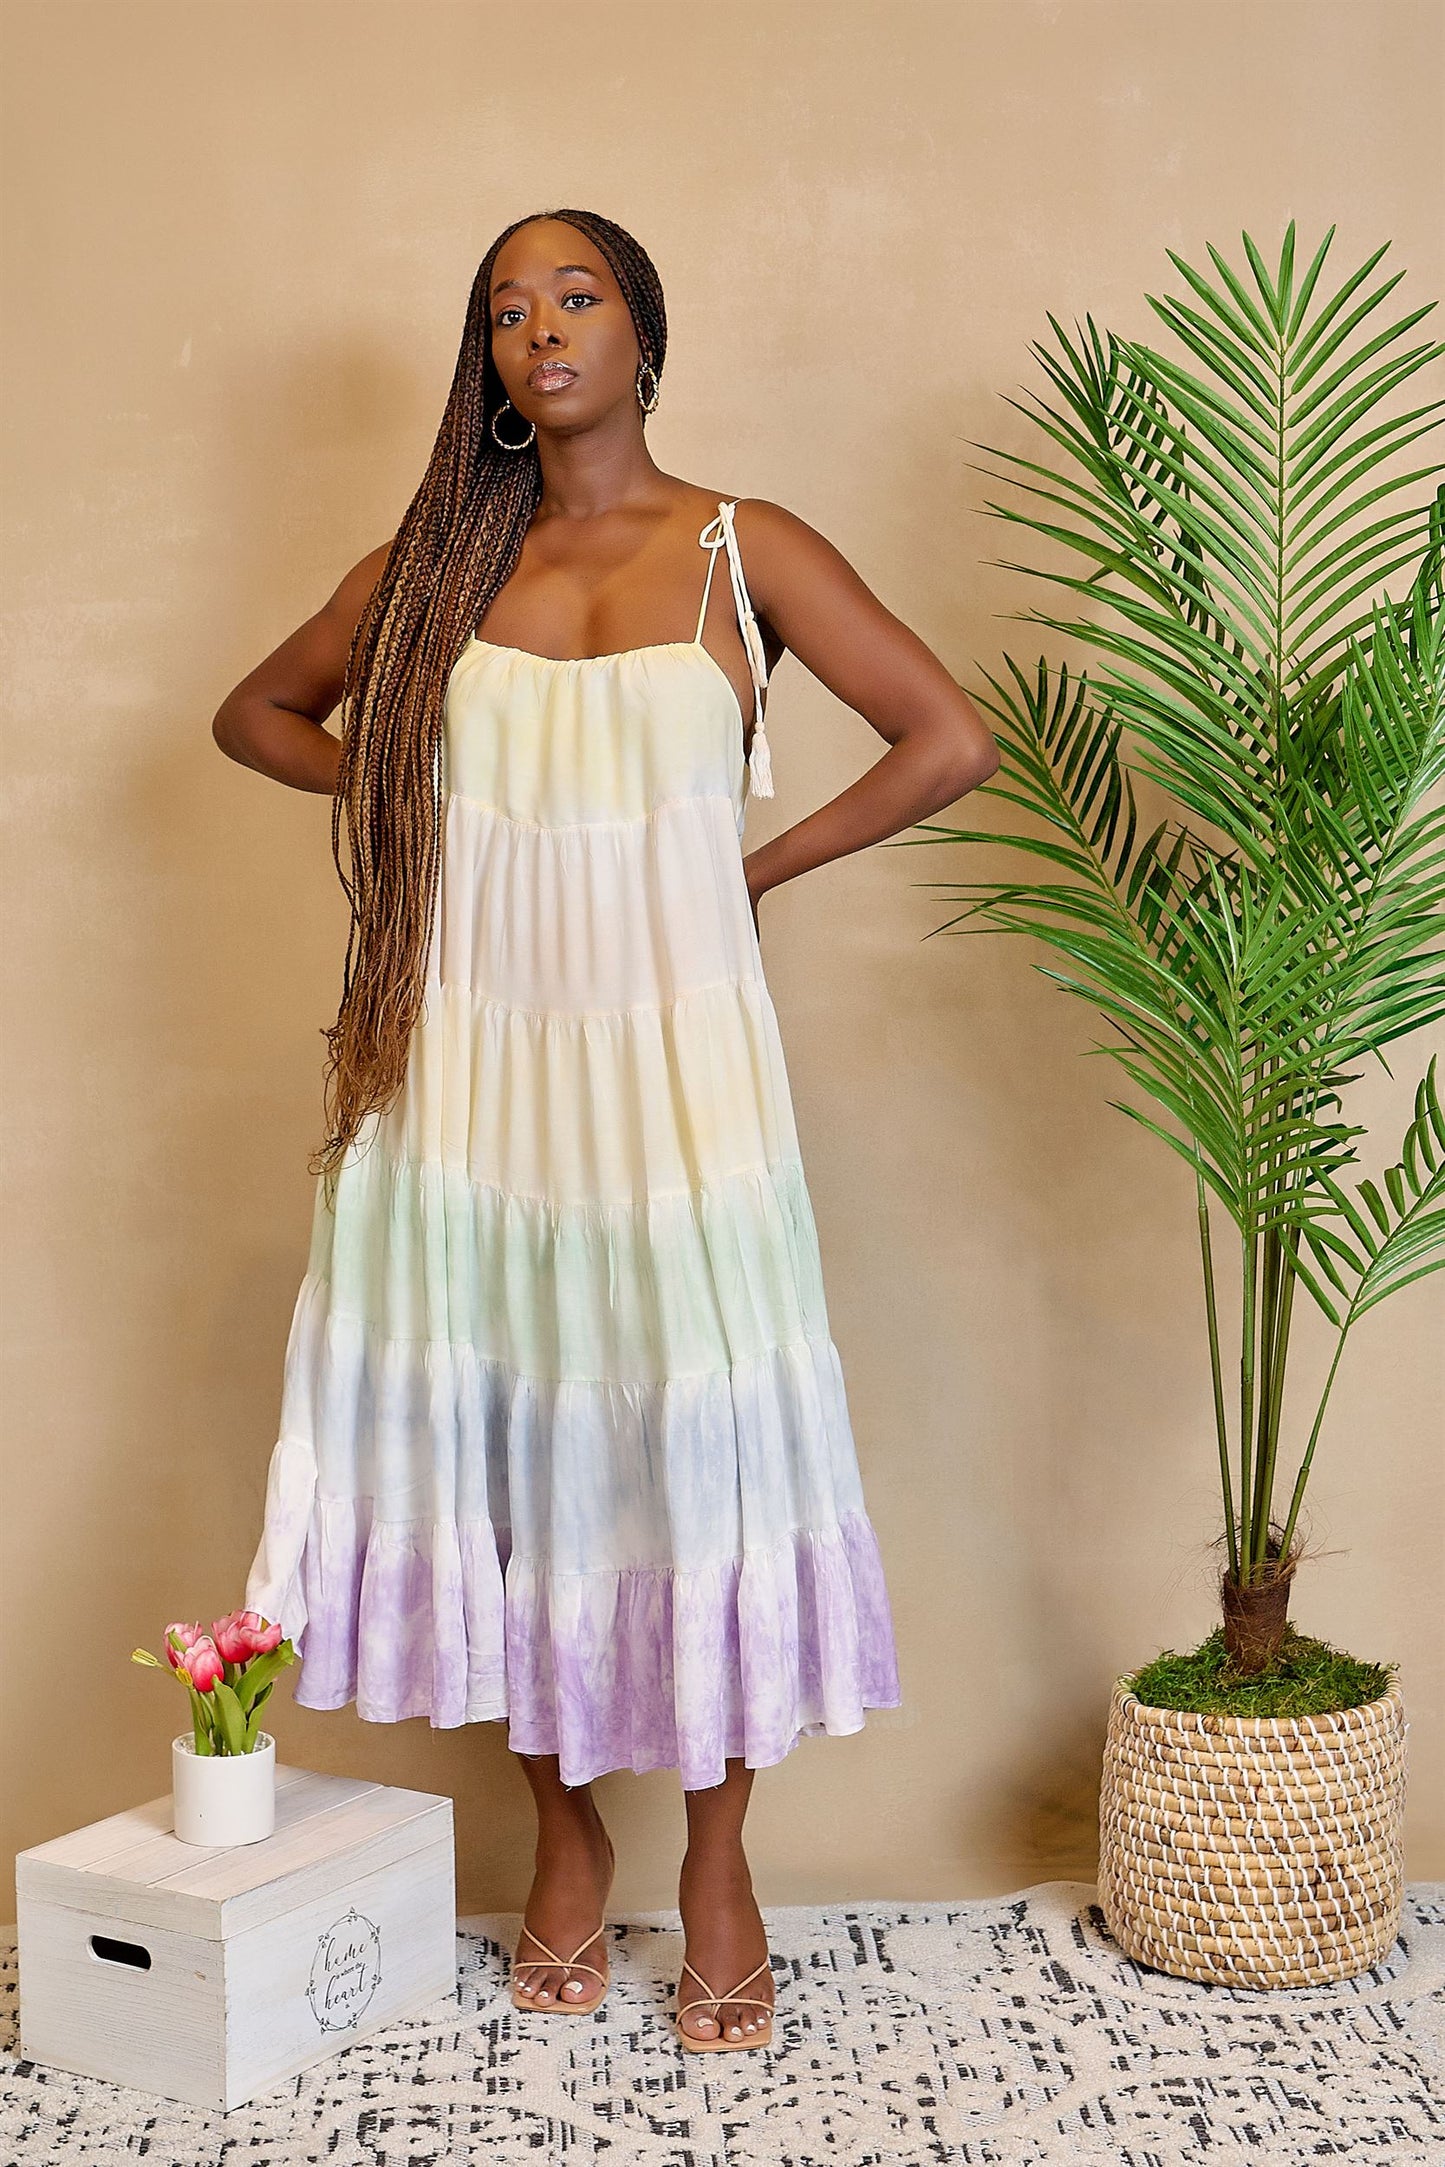 Over the Meadow Multi-Tier Tie-Dye Dress with Tie Straps